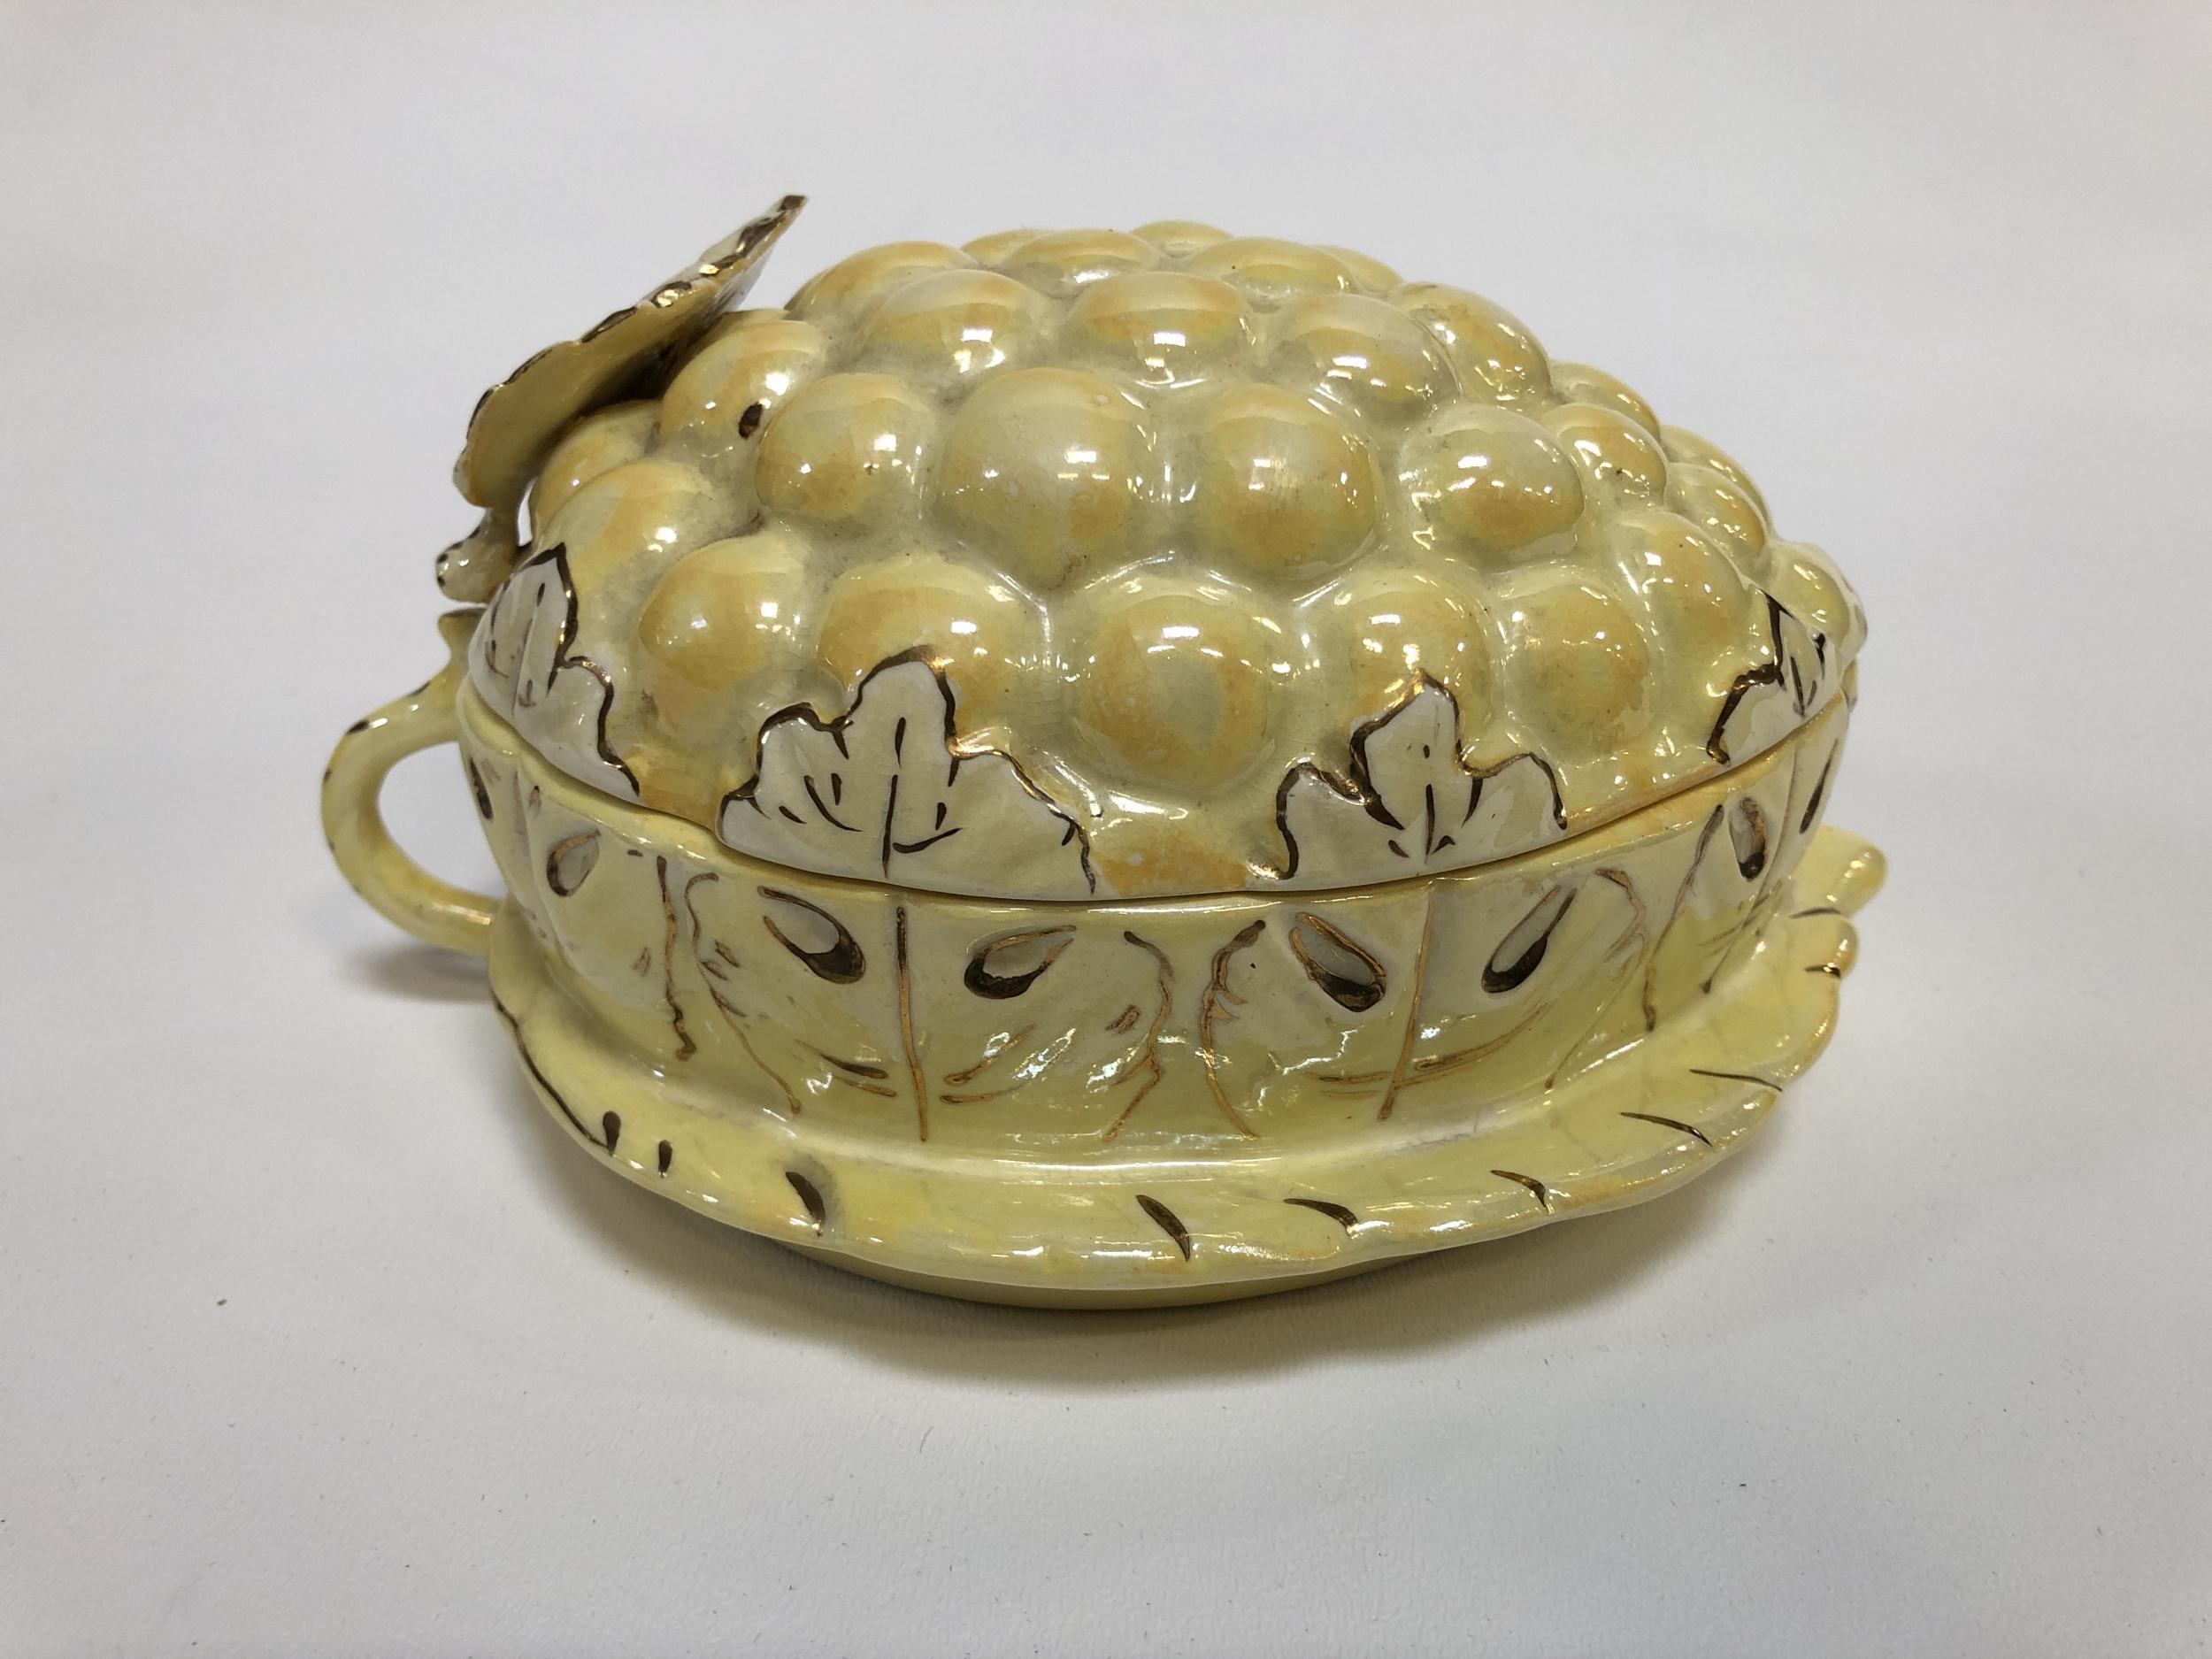 This vintage covered dish is made out of porcelain ceramic. It depicts bright yellow grapes with green-tinted grape leaves, hand-painted with gold veins and finished with a lusterware glaze.

This lusterware grapes box was made by Sasha in the USA